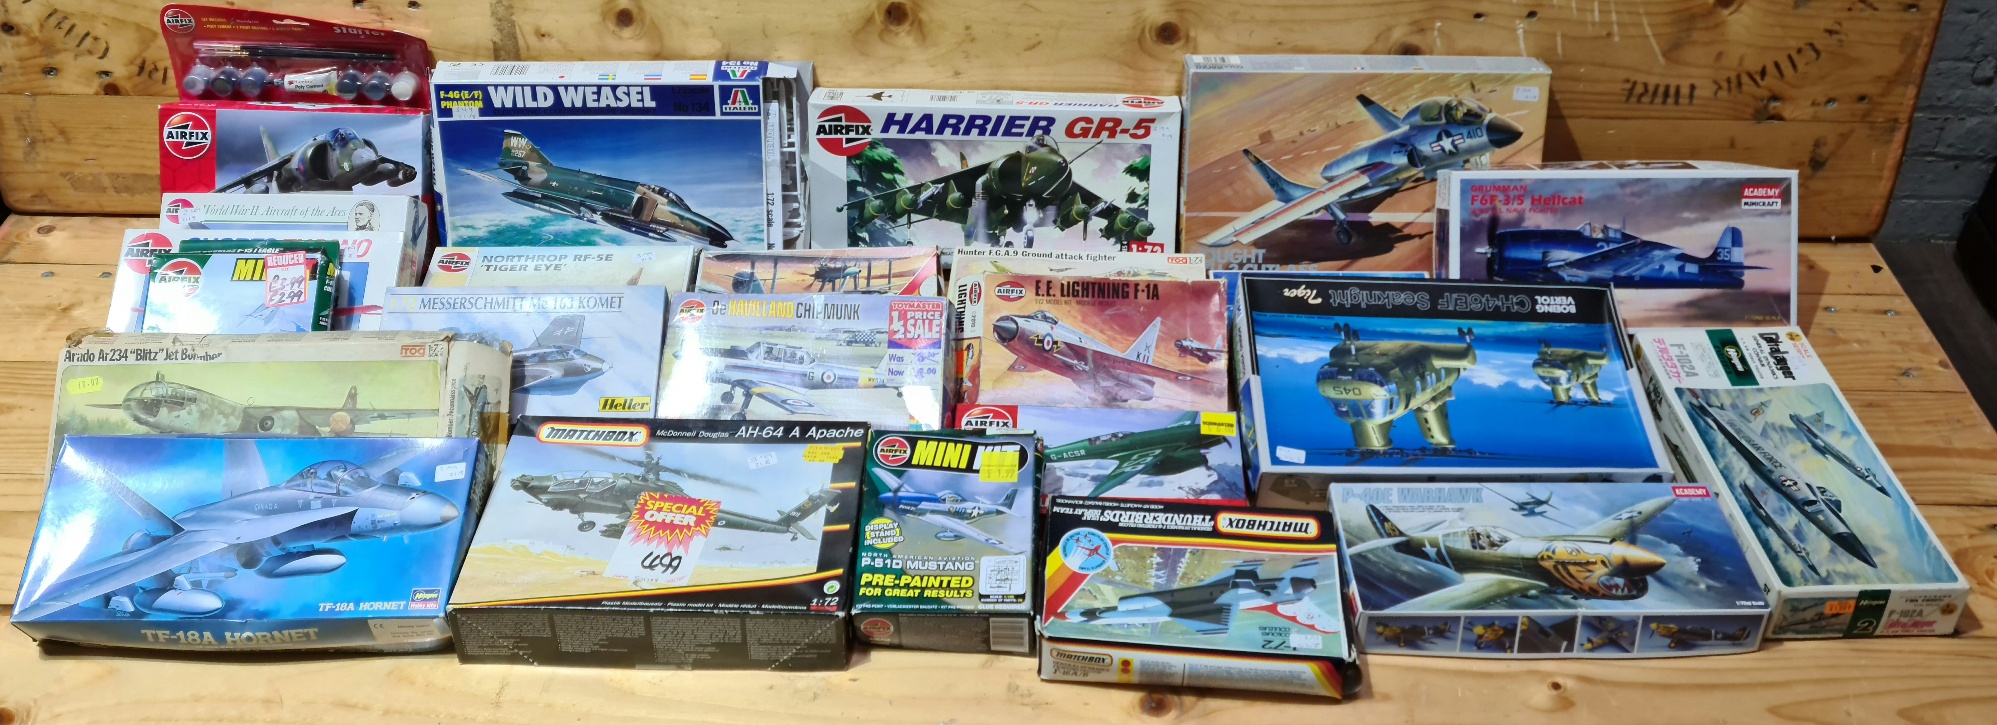 Two boxes containing approx 24 model aircraft kits, including Airfix, Fujimi, Italeri, Matchbox